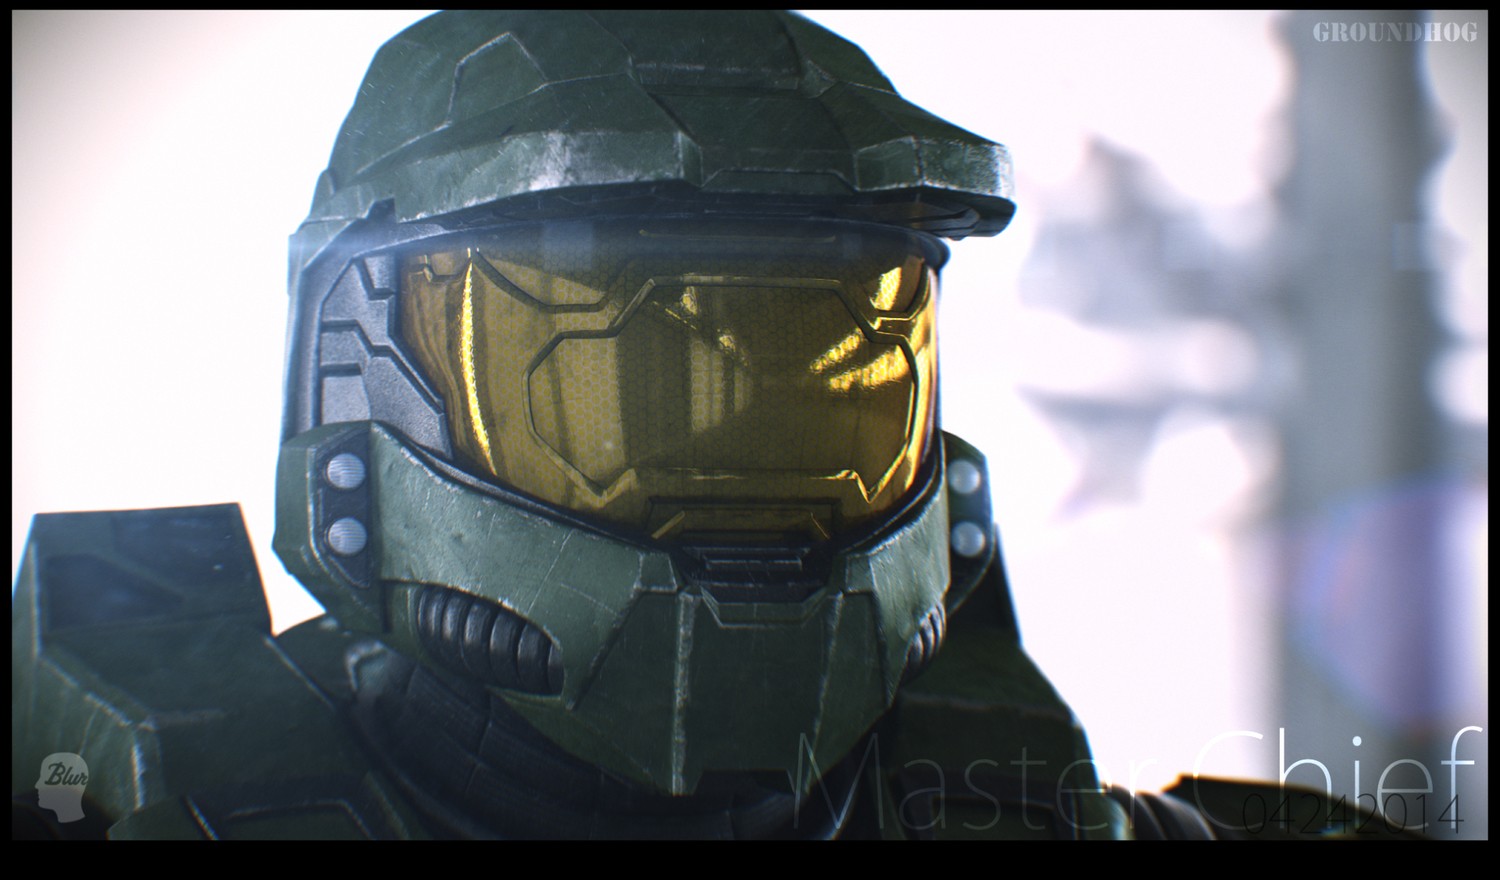 General 1500x880 343 Industries Halo (game) Halo 2 video games Master Chief (Halo) video game characters science fiction helmet futuristic armor futuristic